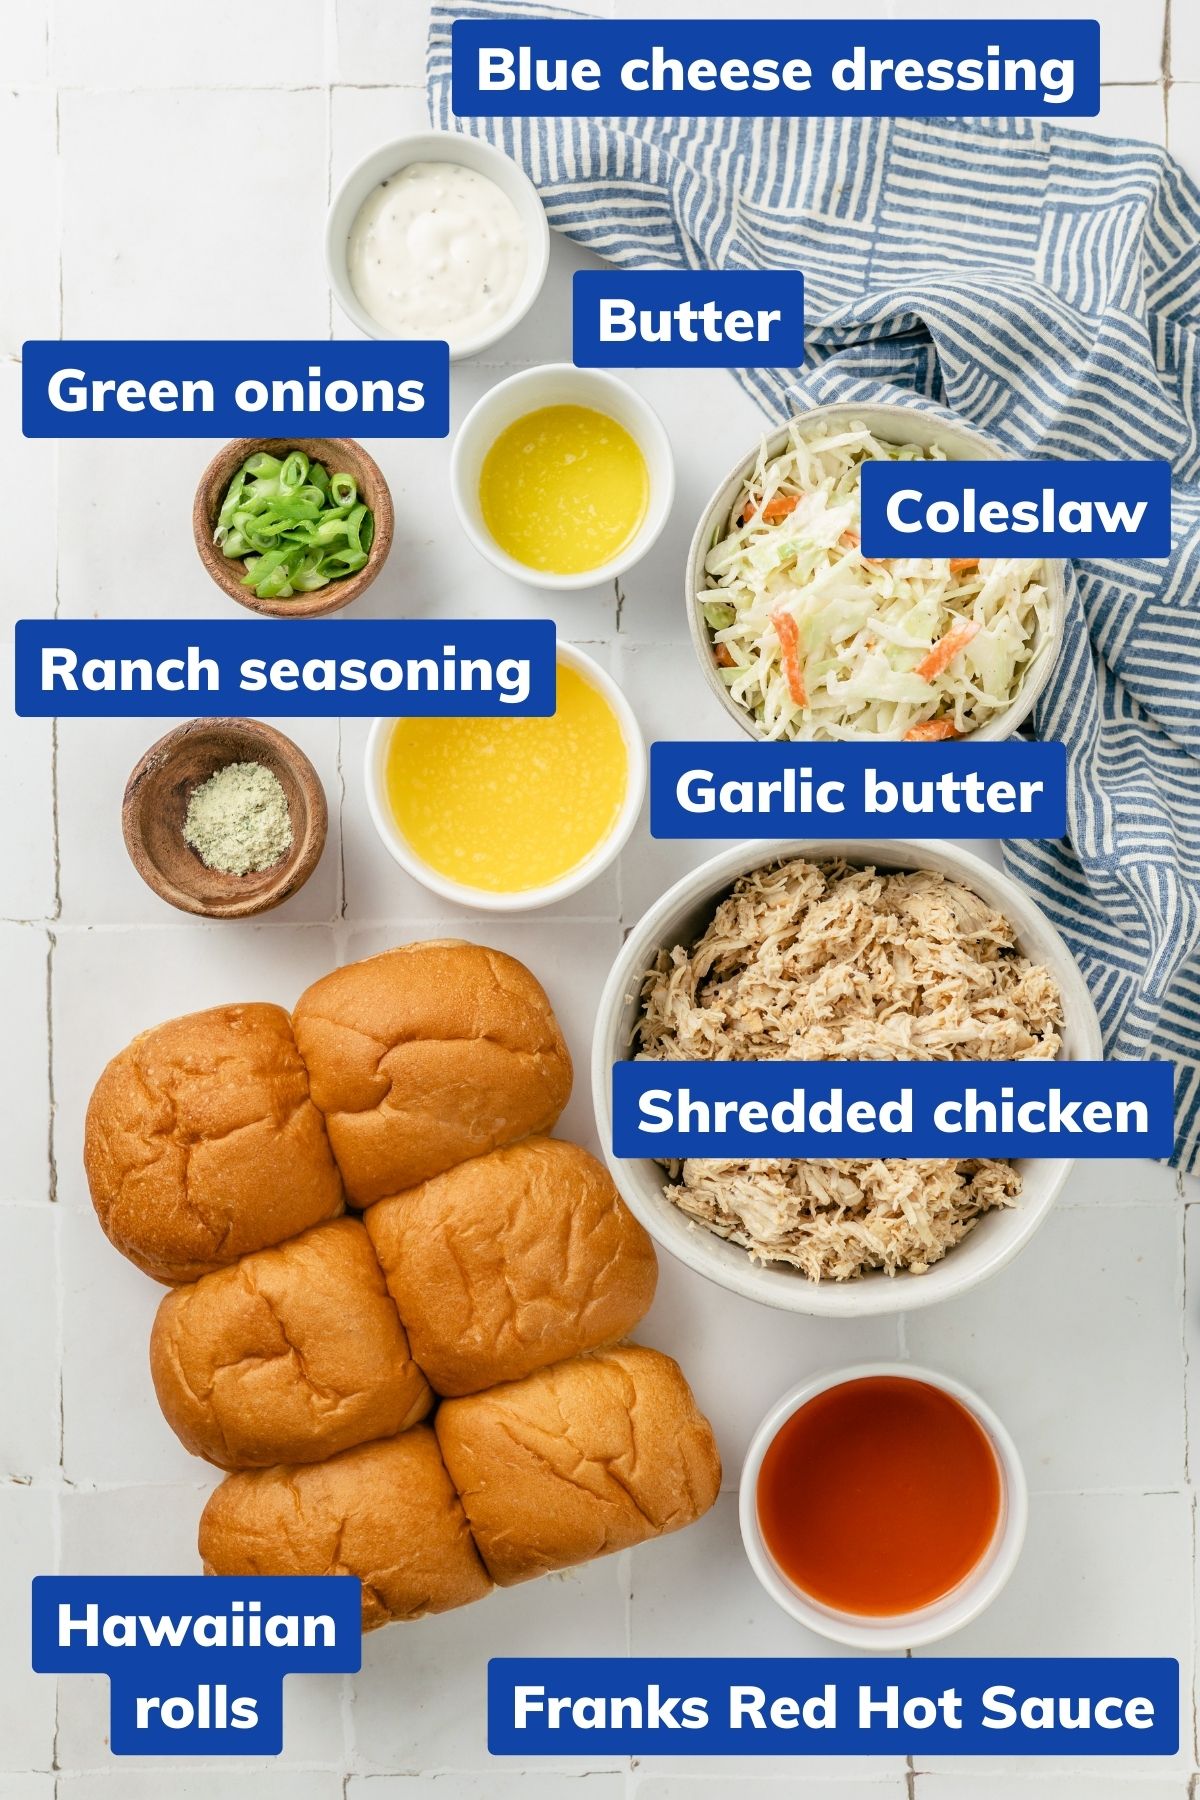 Bowls of ingredients for sliders: Sweet rolls, garlic butter, shredded chicken, ranch seasoning, hot sauce, melted butter, coleslaw, blue cheese dressing, and green onions